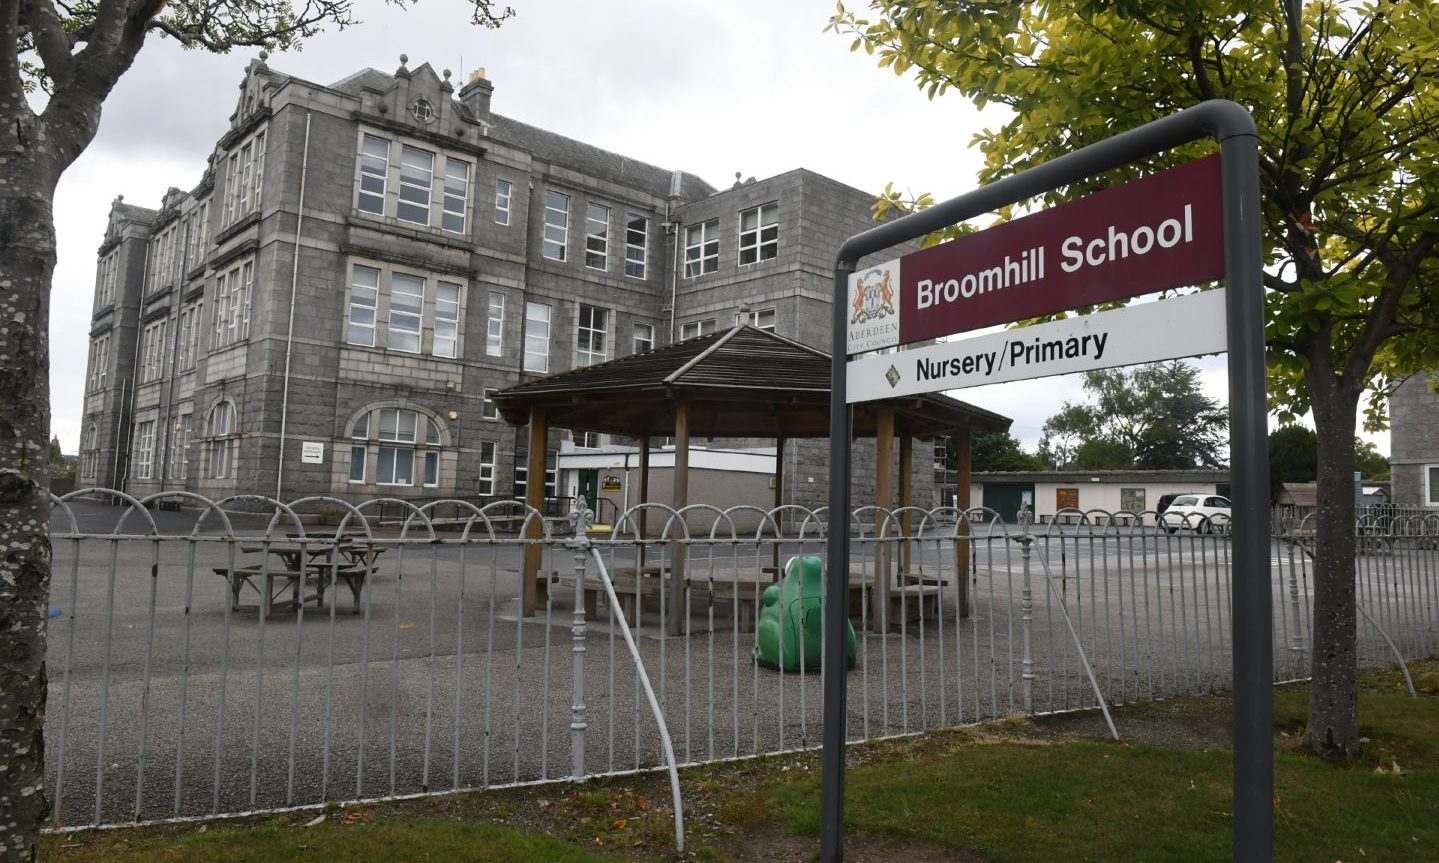 Broomhill Primary School nursery expansion plans take a step forward